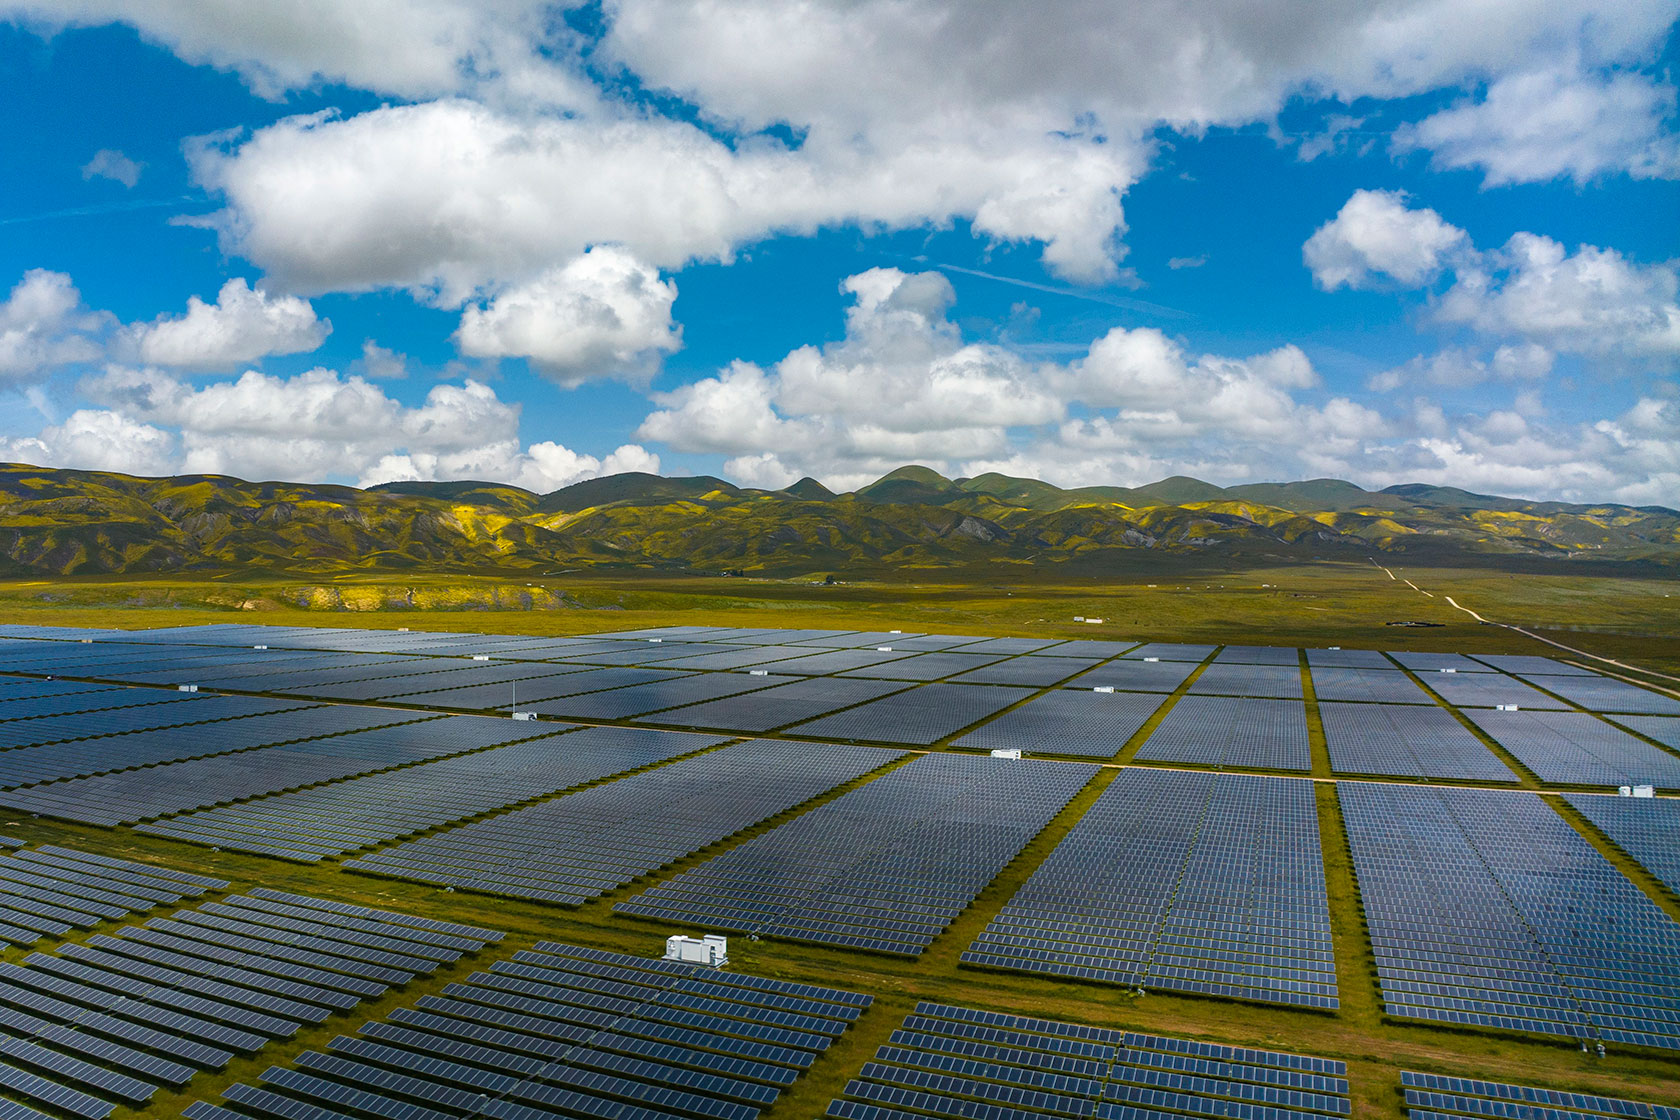 Photo shows an aerial shot of a large solar plant with green hills in the background on a partly cloudy day